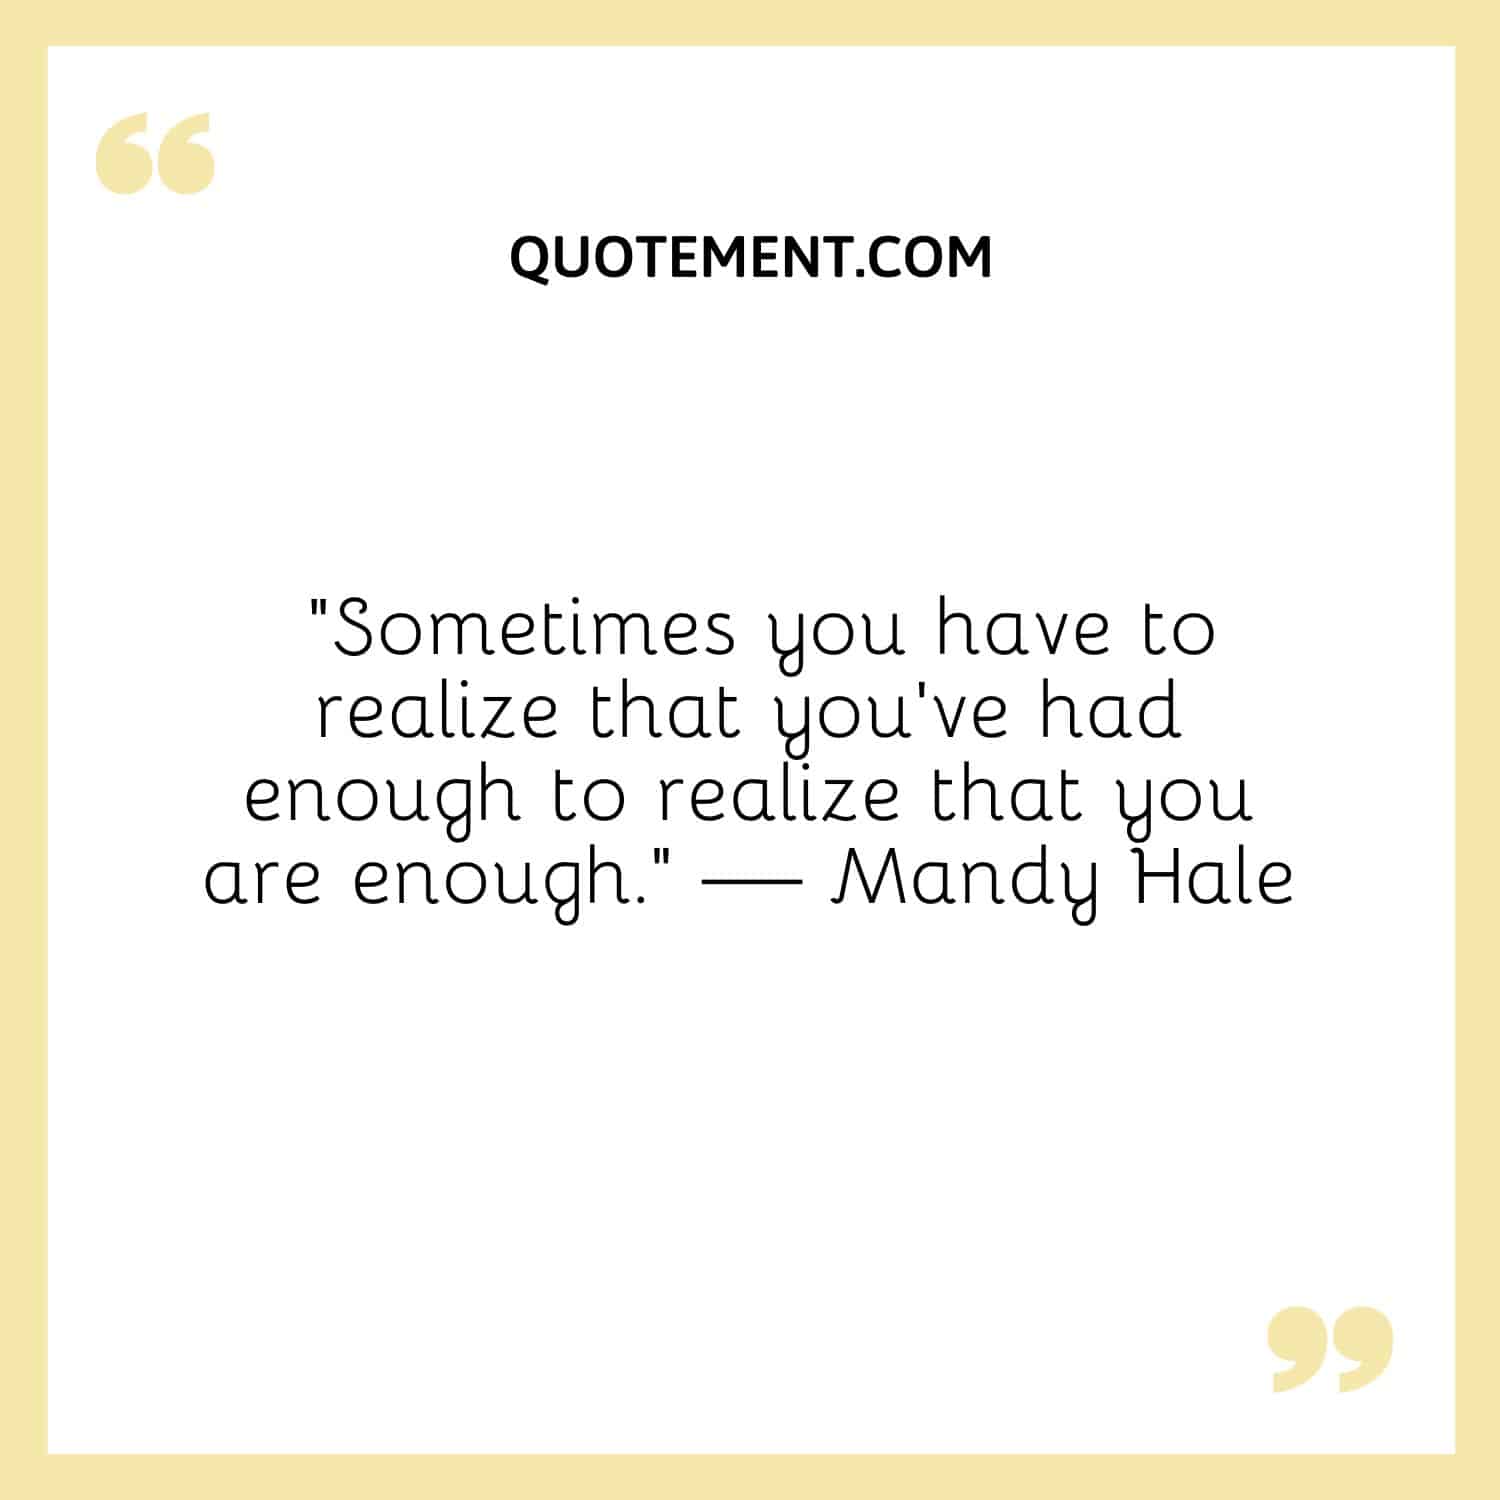 Sometimes you have to realize that you’ve had enough to realize that you are enough.